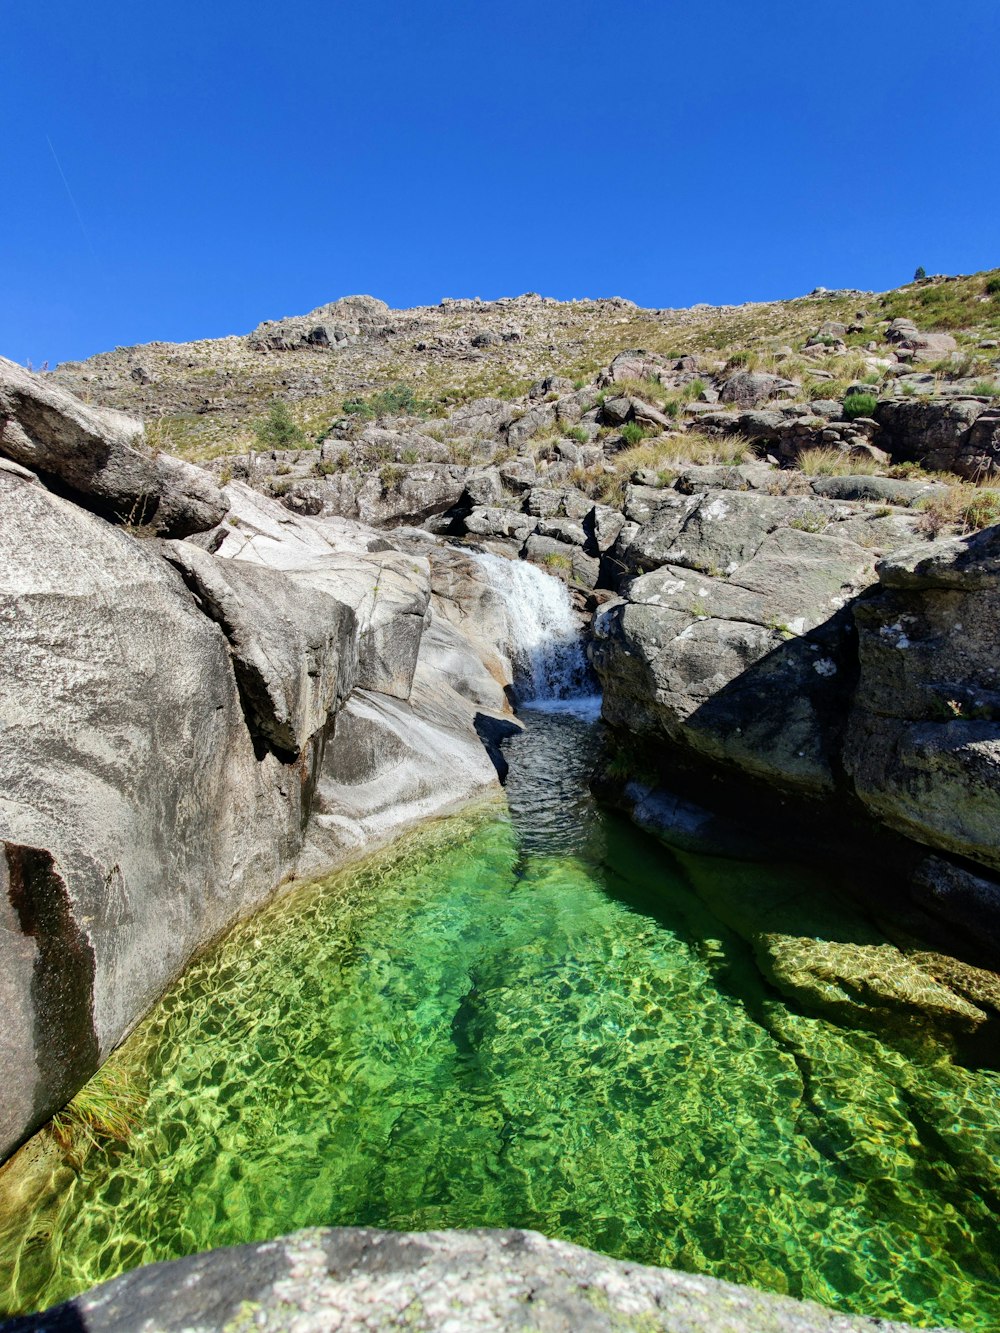 a green pool of water in a rocky area